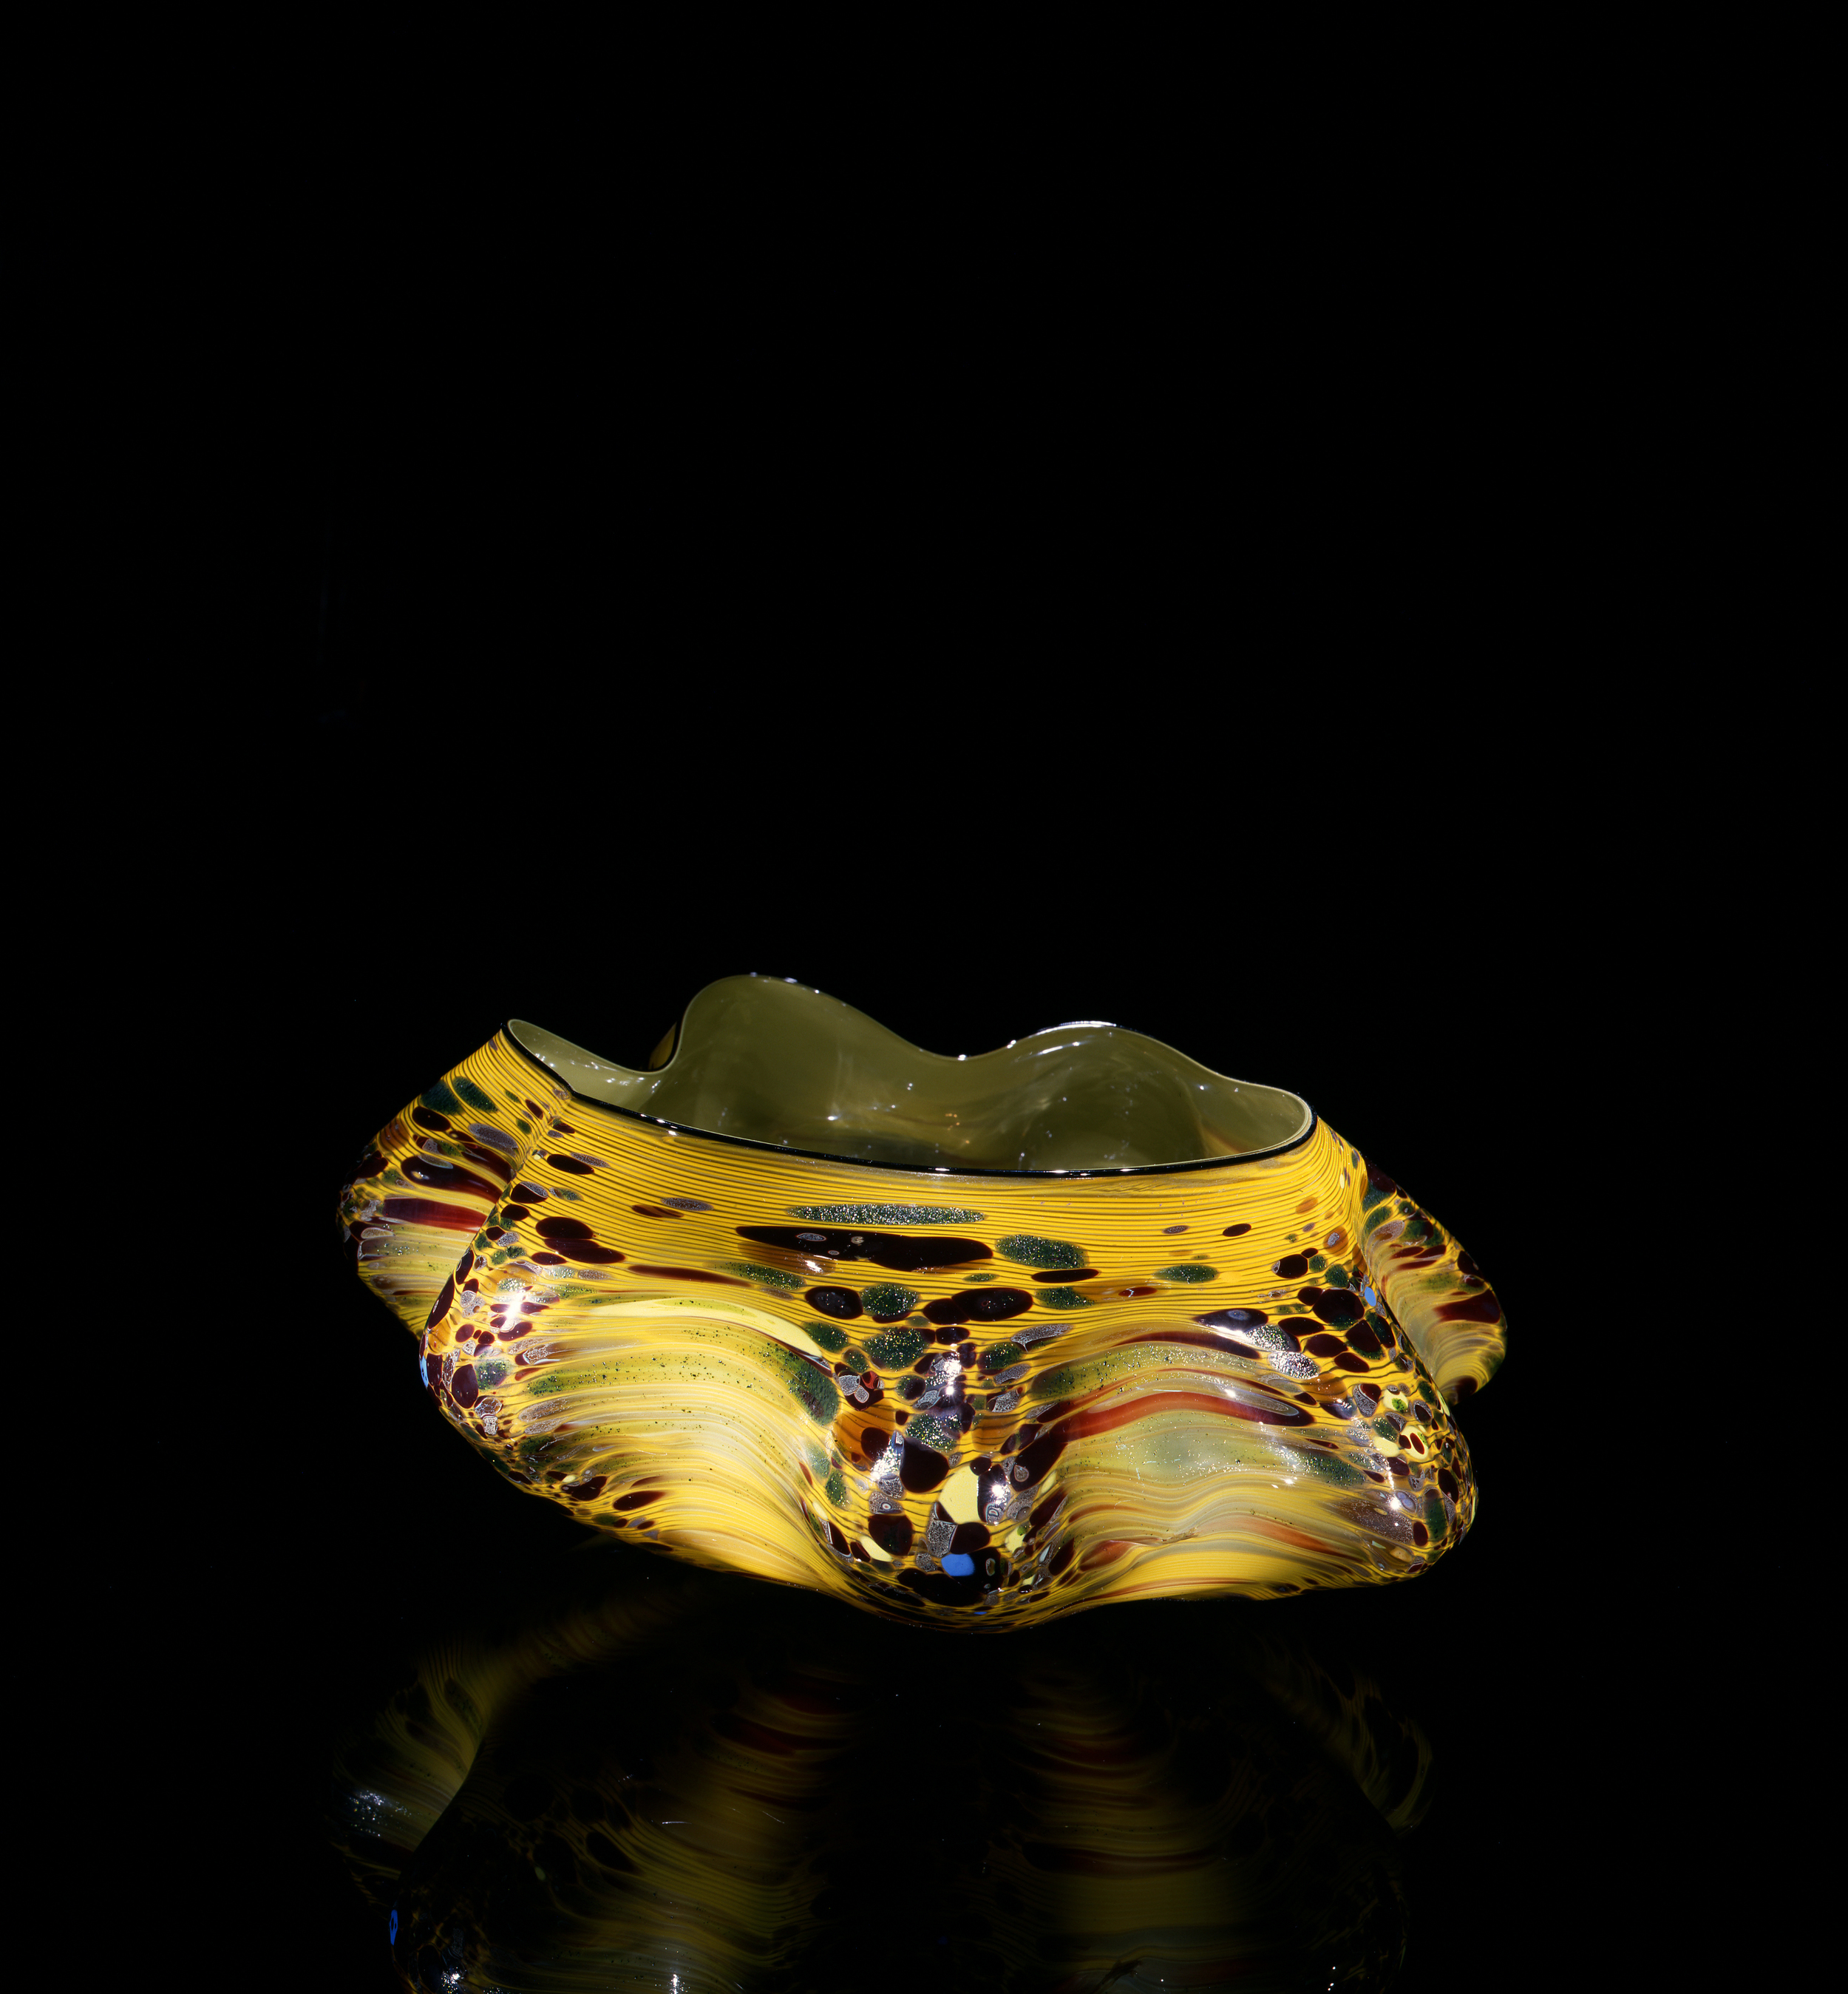  Dale Chihuly,&nbsp; Hazel Macchia with Carbon Lip Wrap&nbsp; (1981, glass, 7 x 15 x 14&nbsp;inches), DC.101 